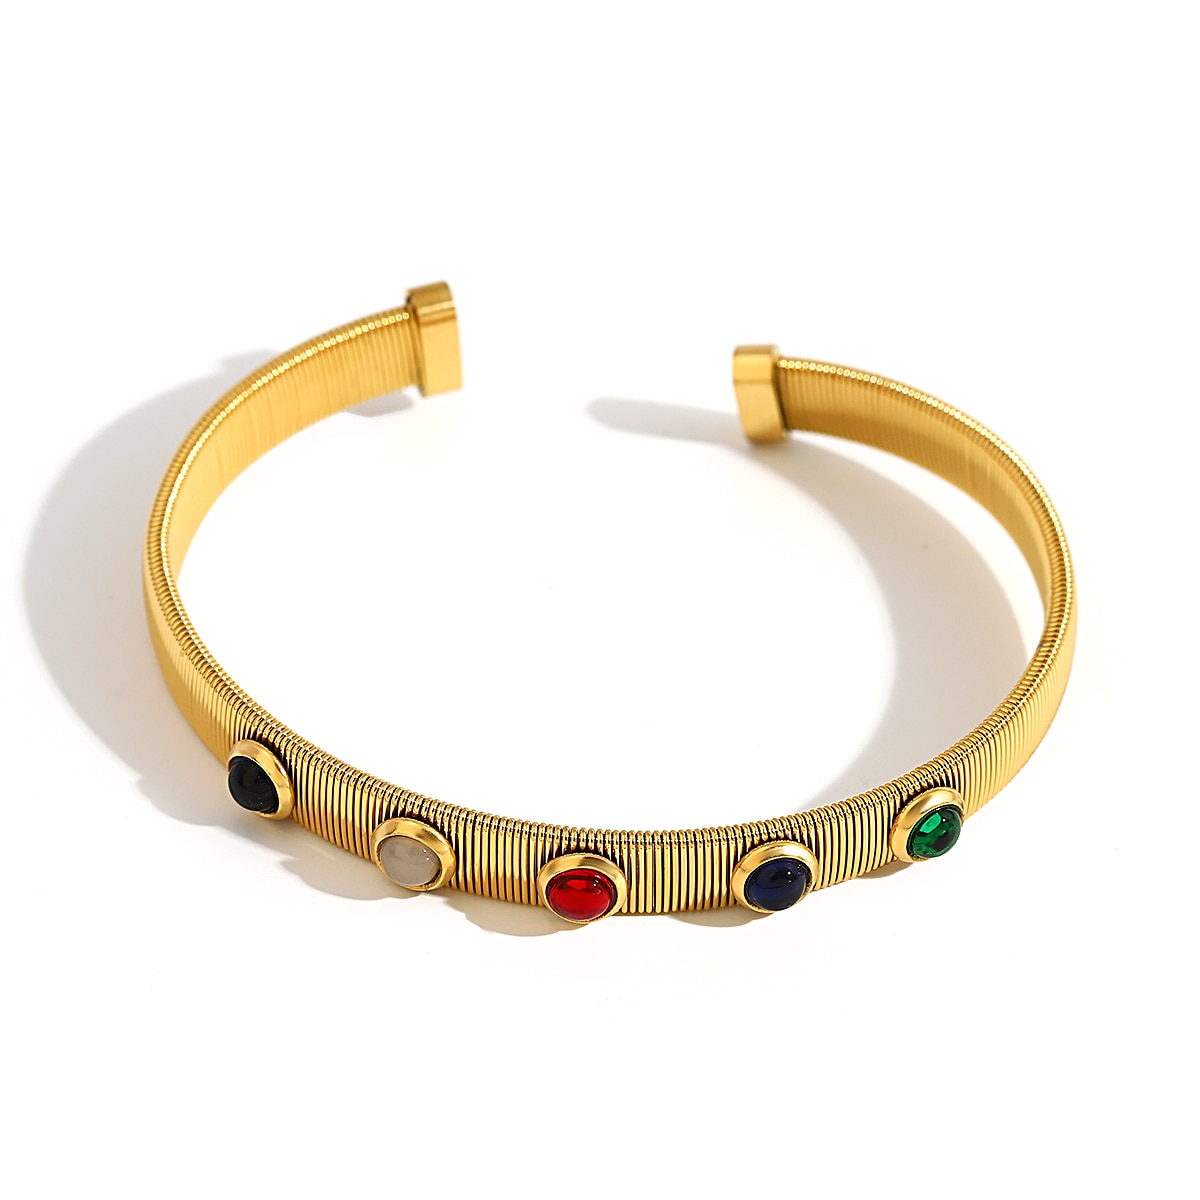 Chic Gold-Plated Stainless Steel Bangle Bracelet